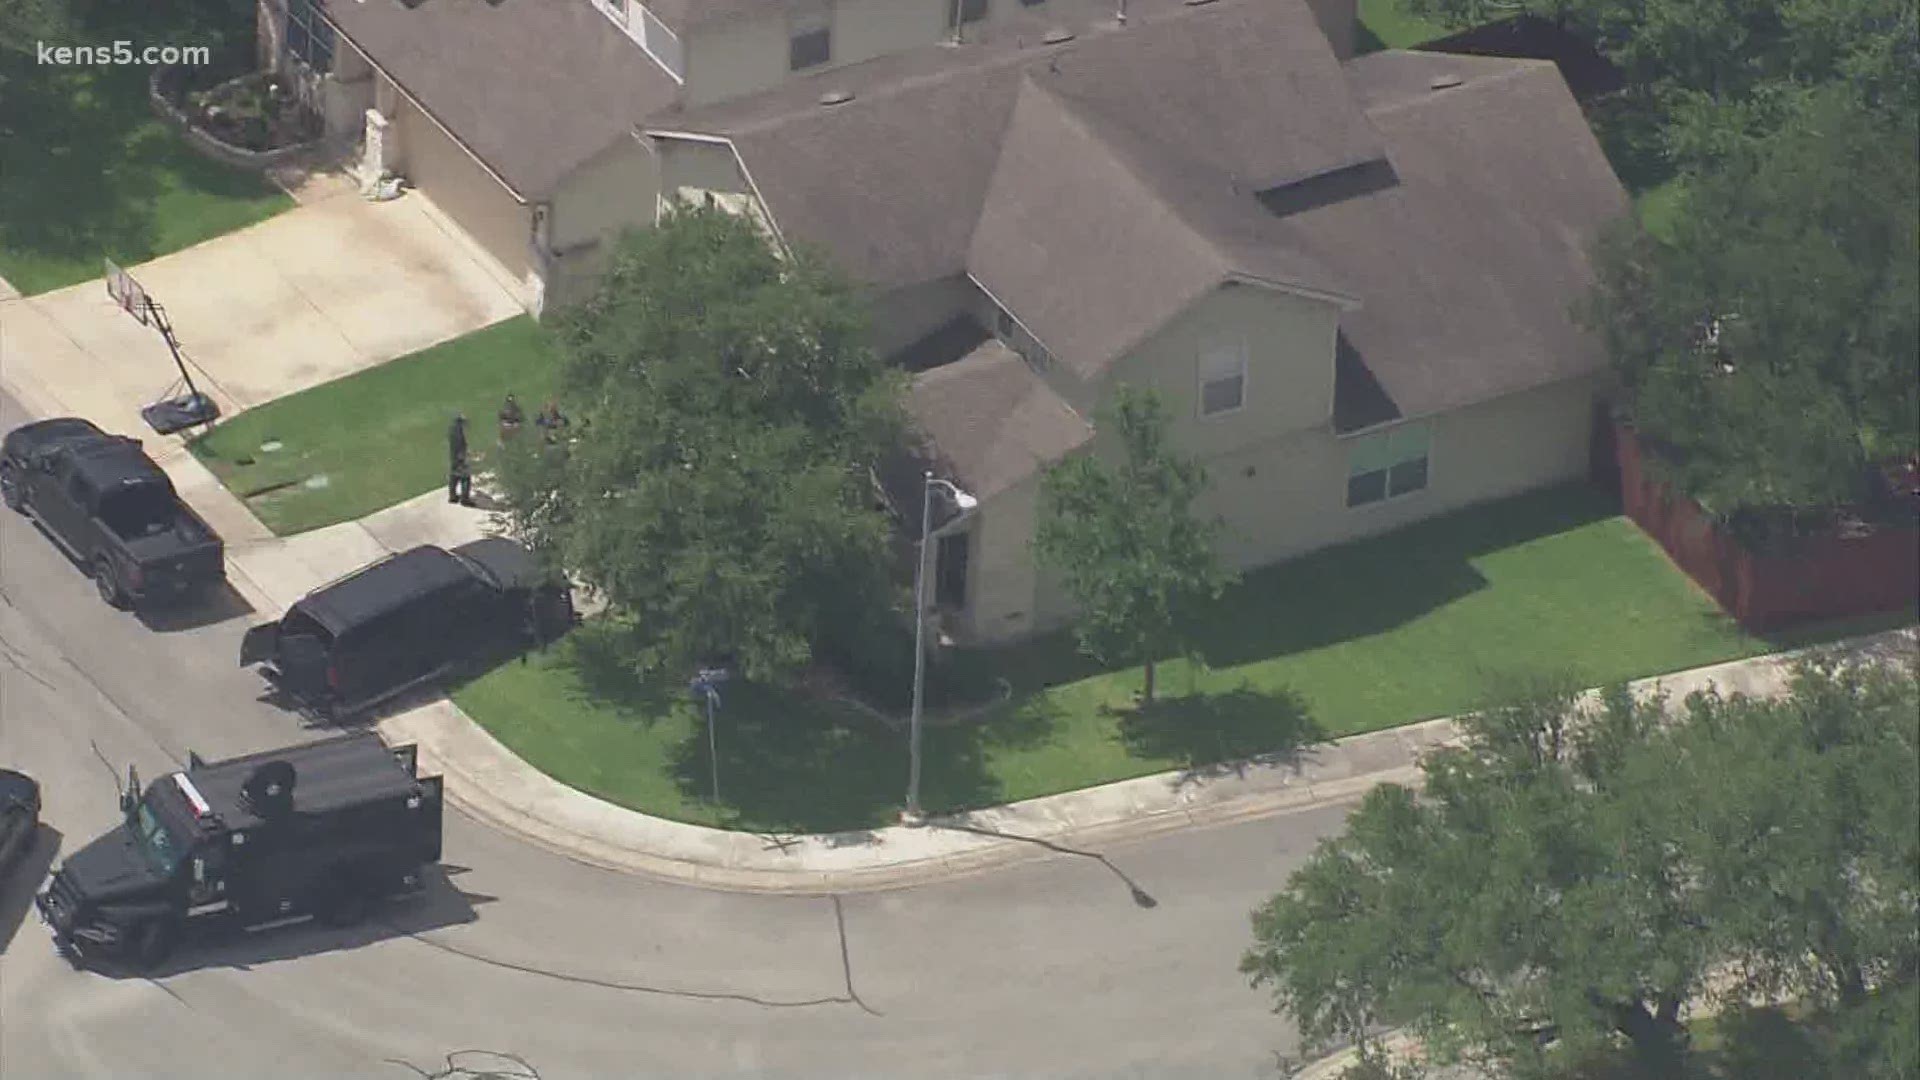 San Antonio Police found a family of 6 death in their car in the garage of their Stone Oak home.